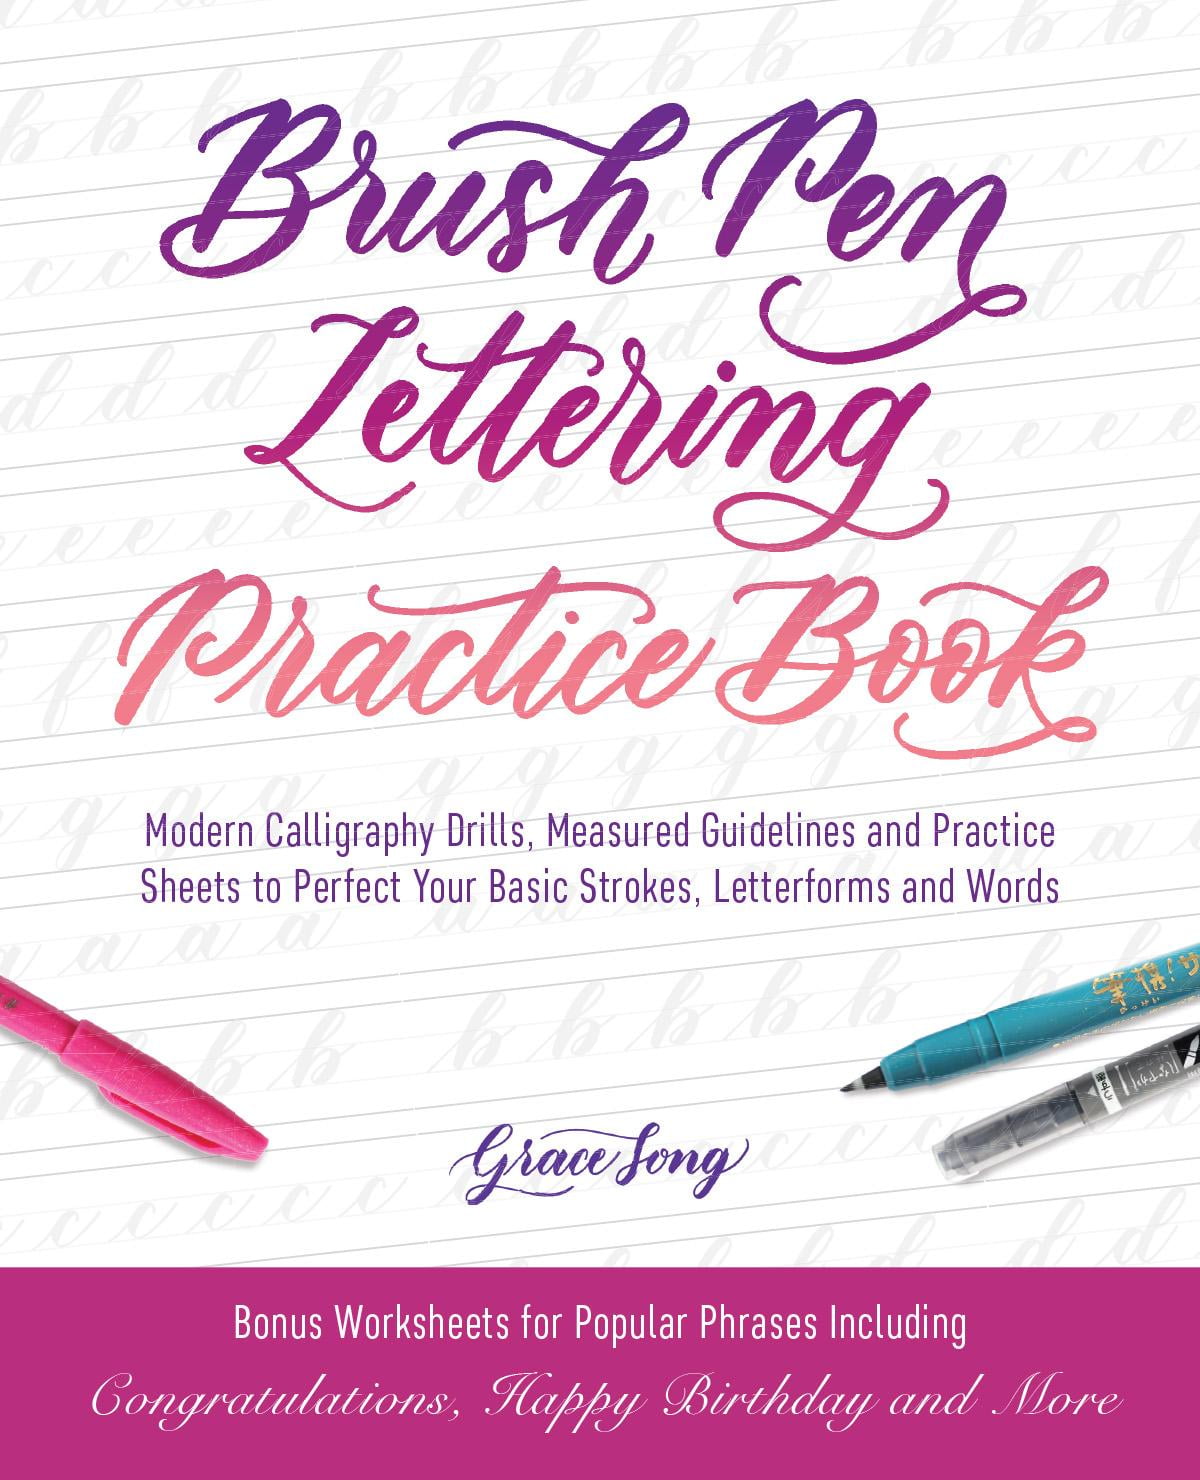 Brush Pen Lettering Practice Book Modern Calligraphy Drills Measured
Guidelines and Practice Sheets to Perfect Your Basic Strokes
Letterforms and Words Epub-Ebook